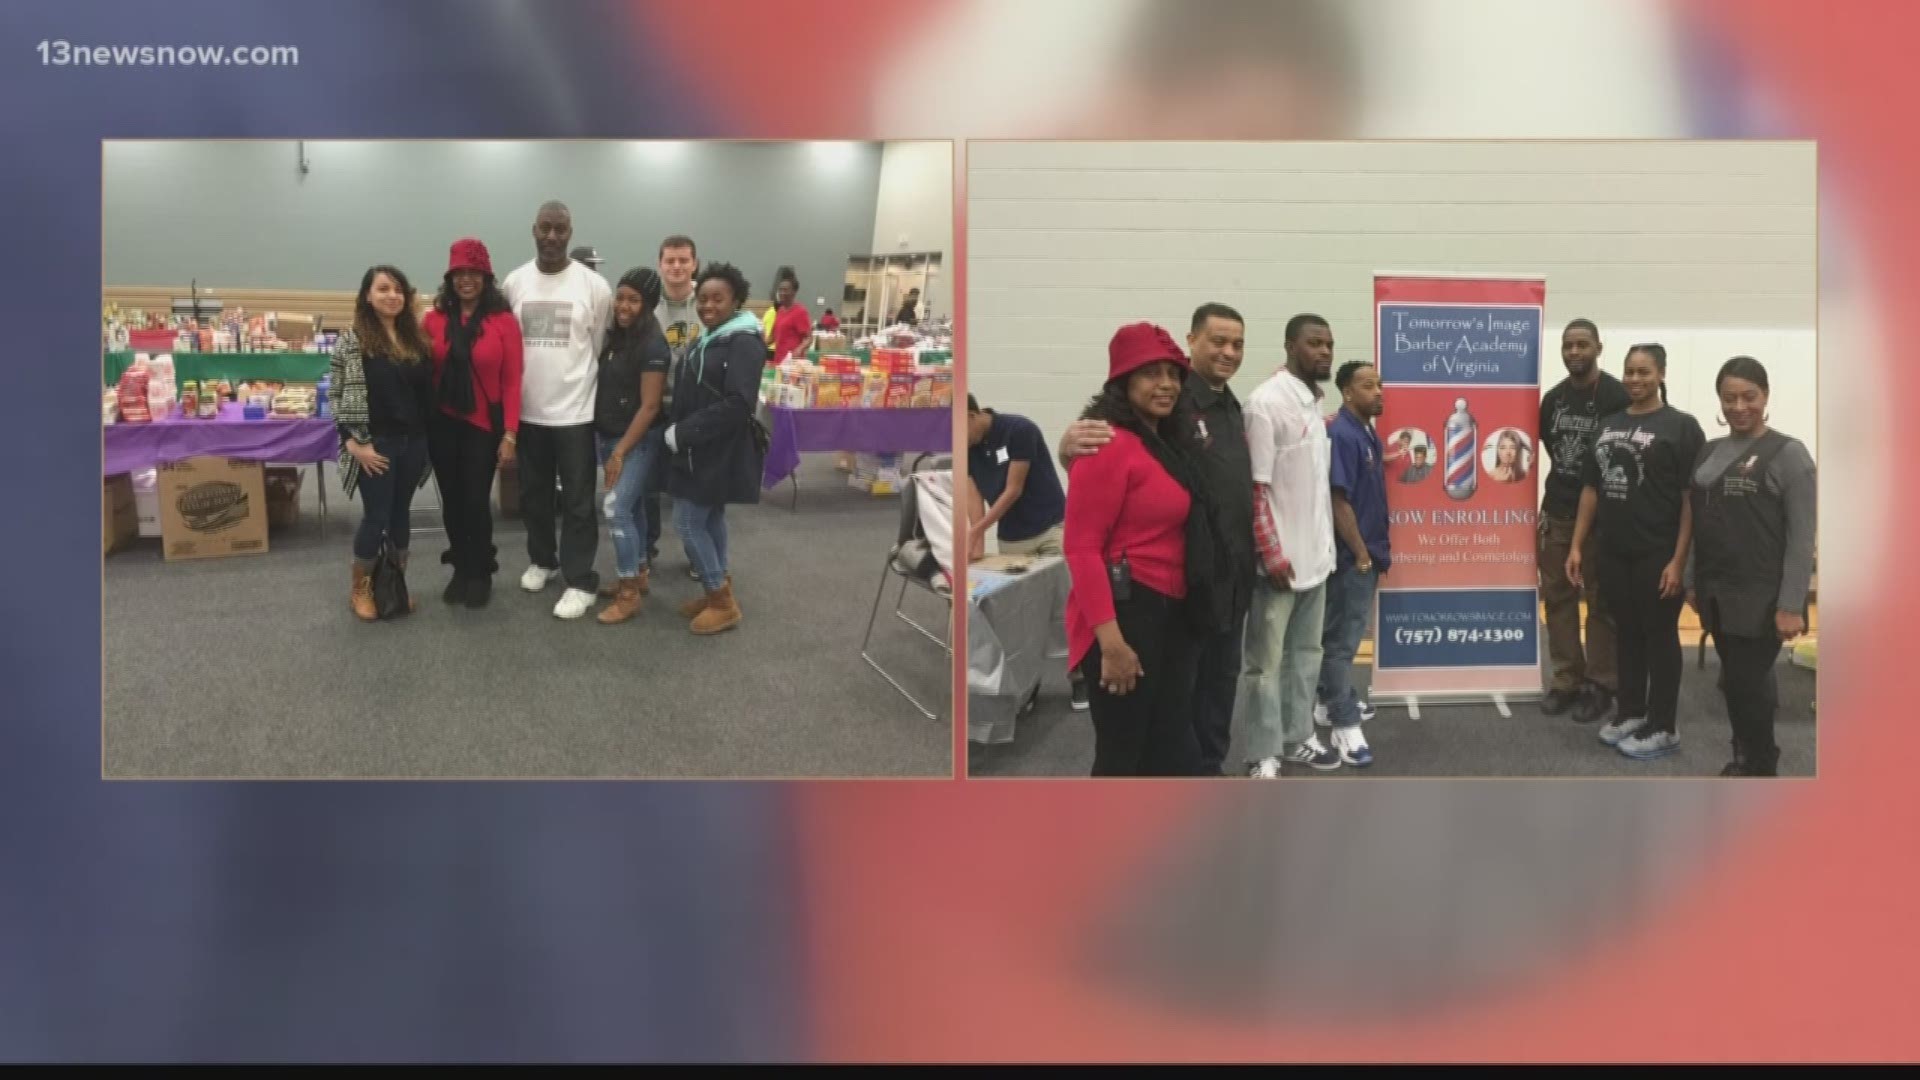 One City Celebrations North District is helping those who need it with a job and resource fair. The fair is scheduled for Wednesday, Dec. 12 from 10 a.m. to 1 p.m. Councilwoman Sharon Scott is hosting the event at the Denbigh Community Center.